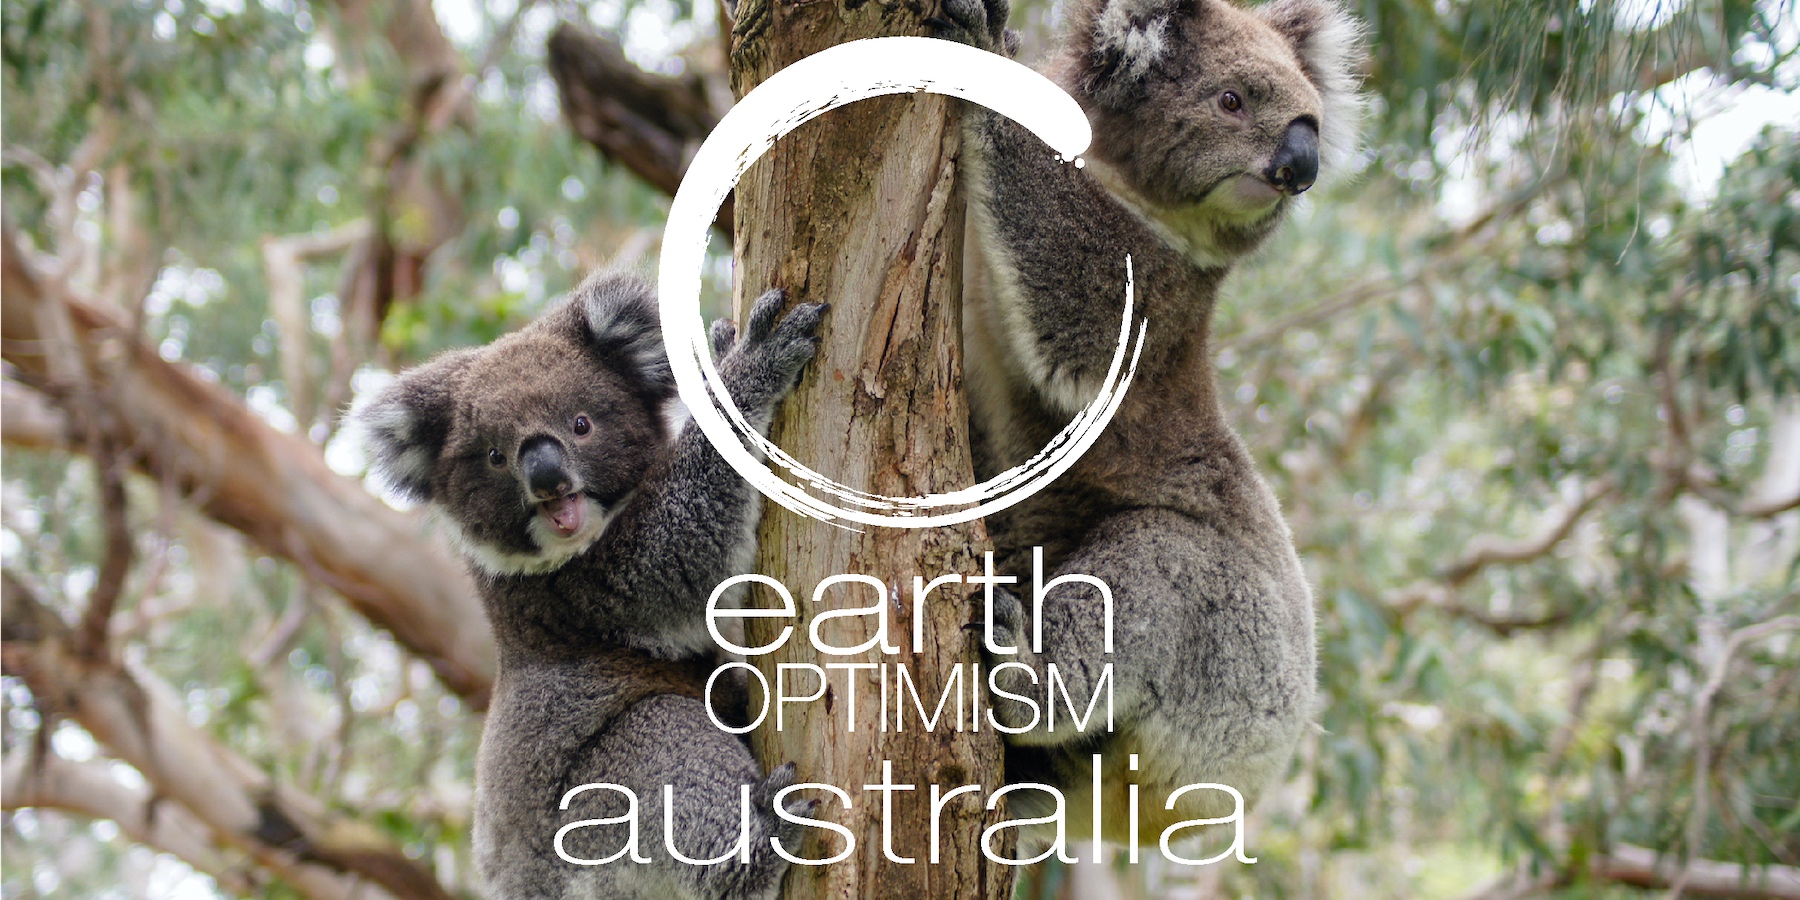 A special message from the Earth Optimism Alliance